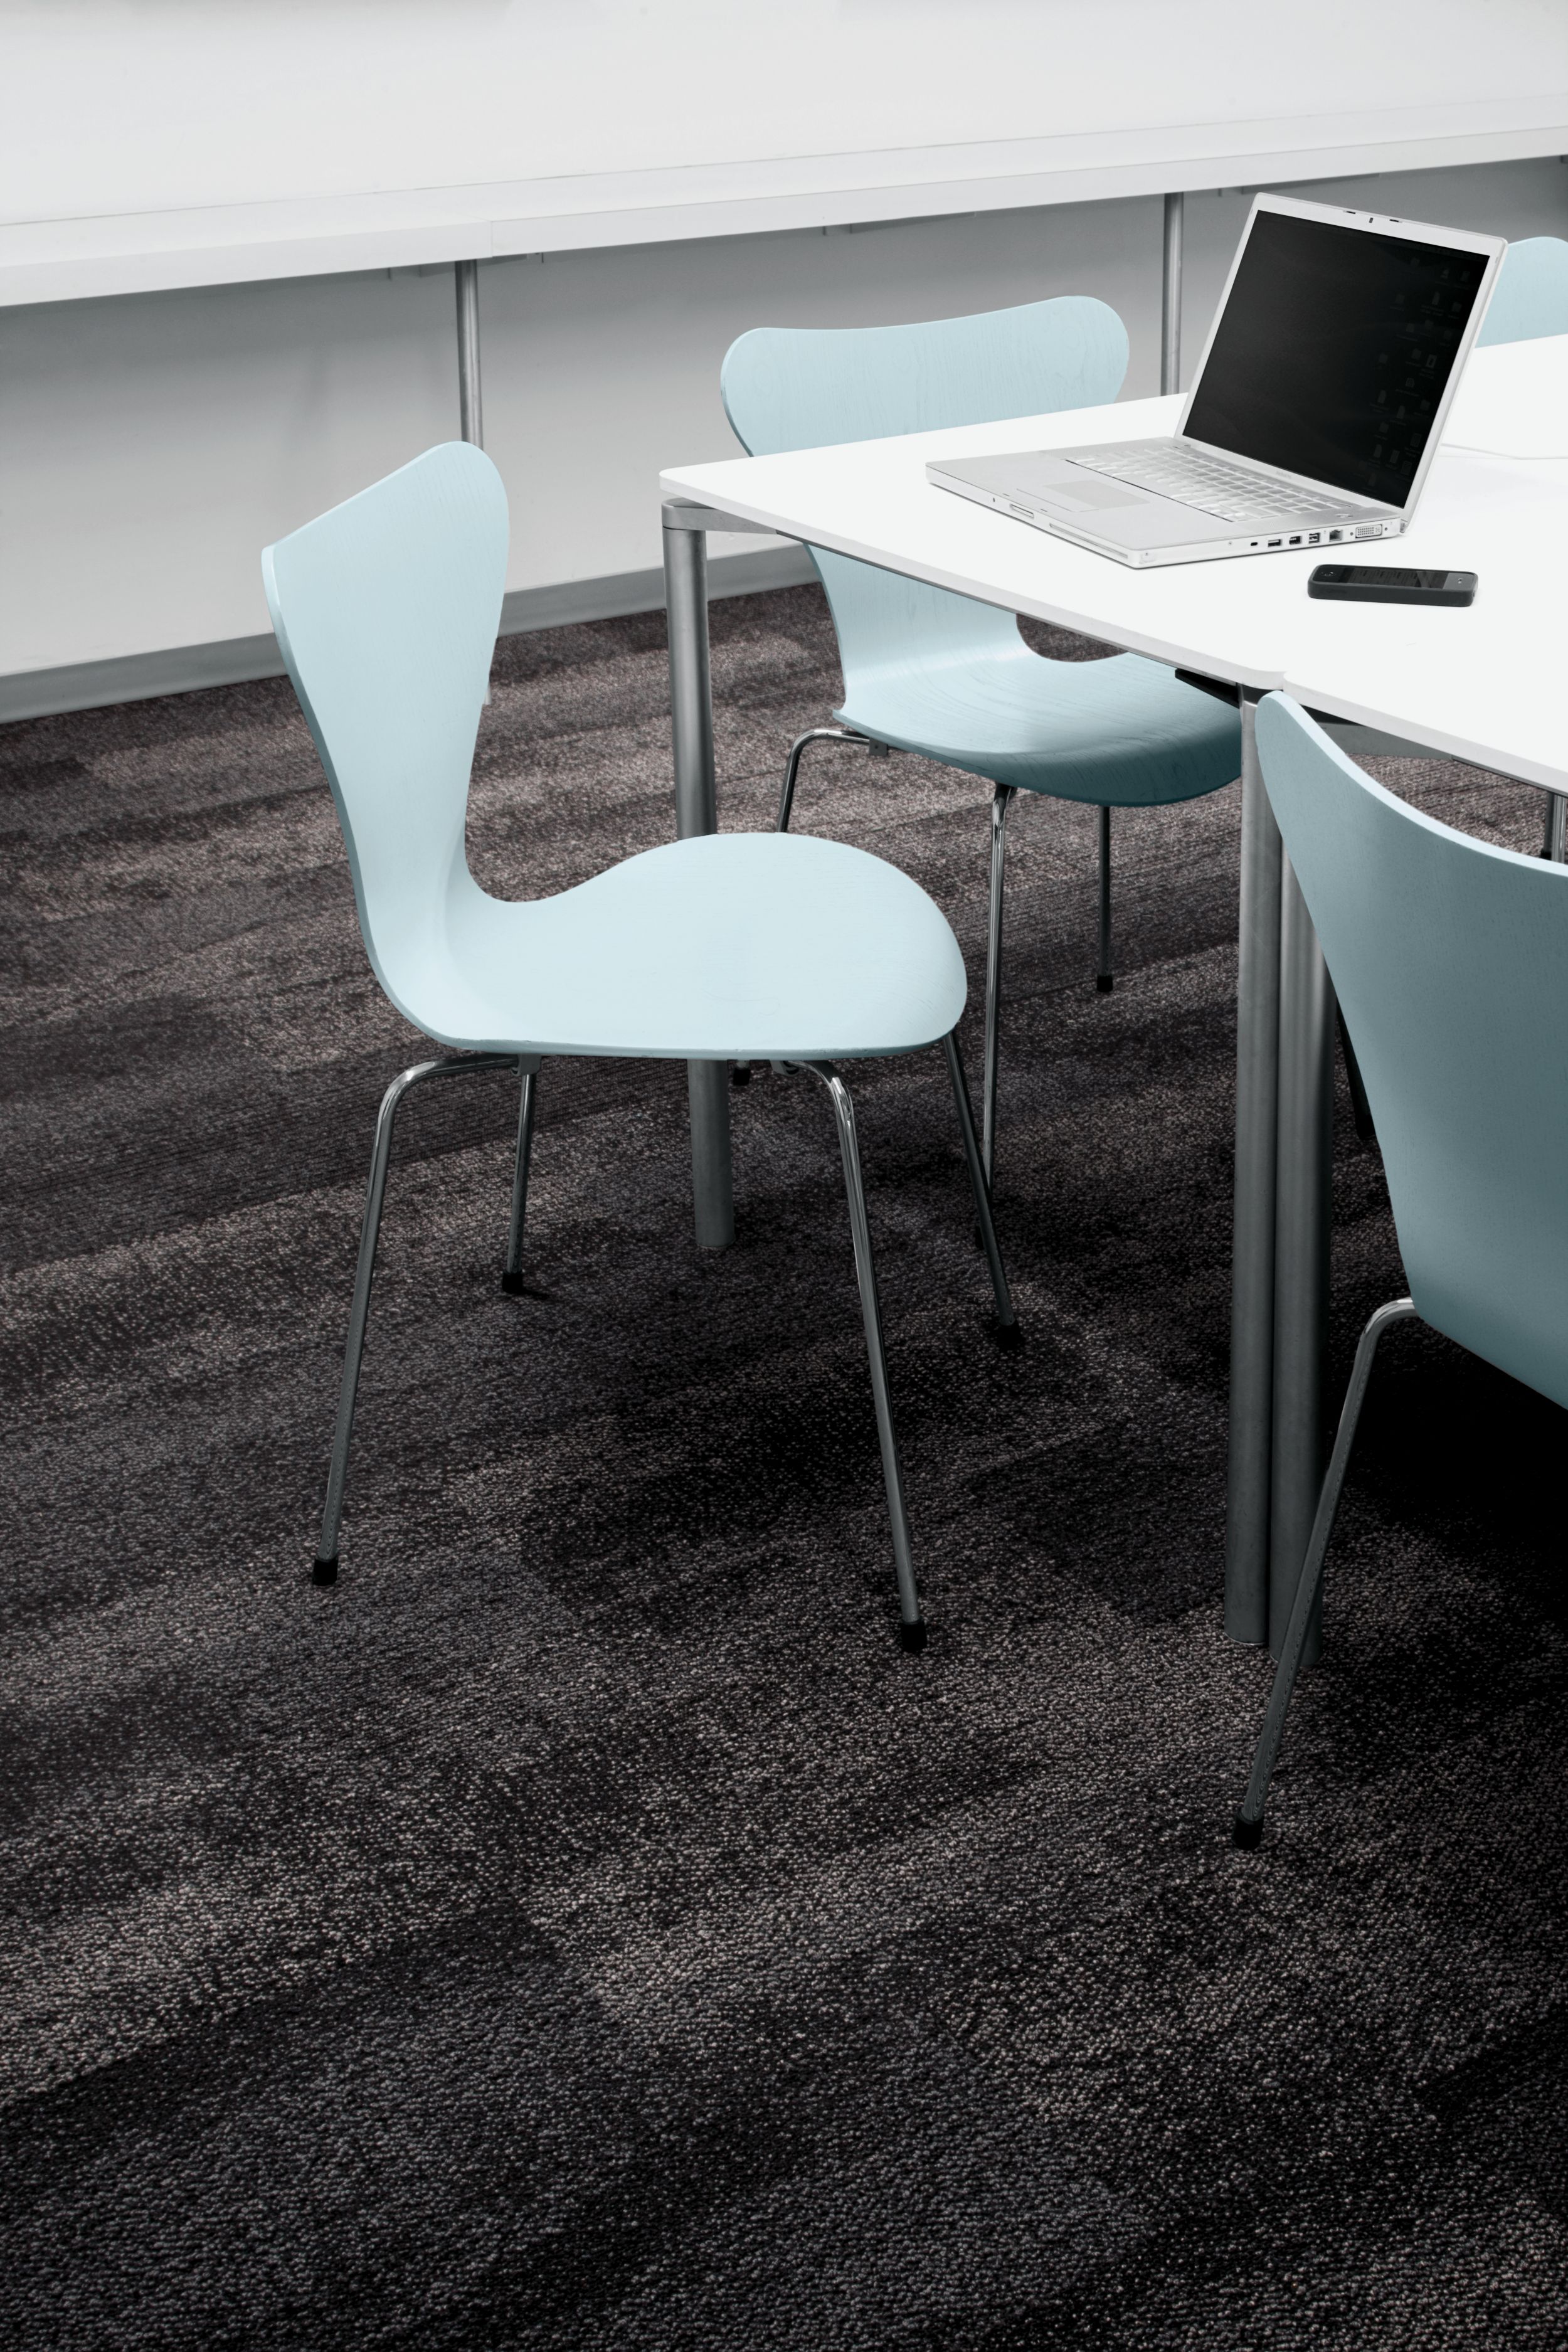 Interface Neighborhood Smooth plank carpet tile in meeting room or classroom with laptop and light blue chairs imagen número 5